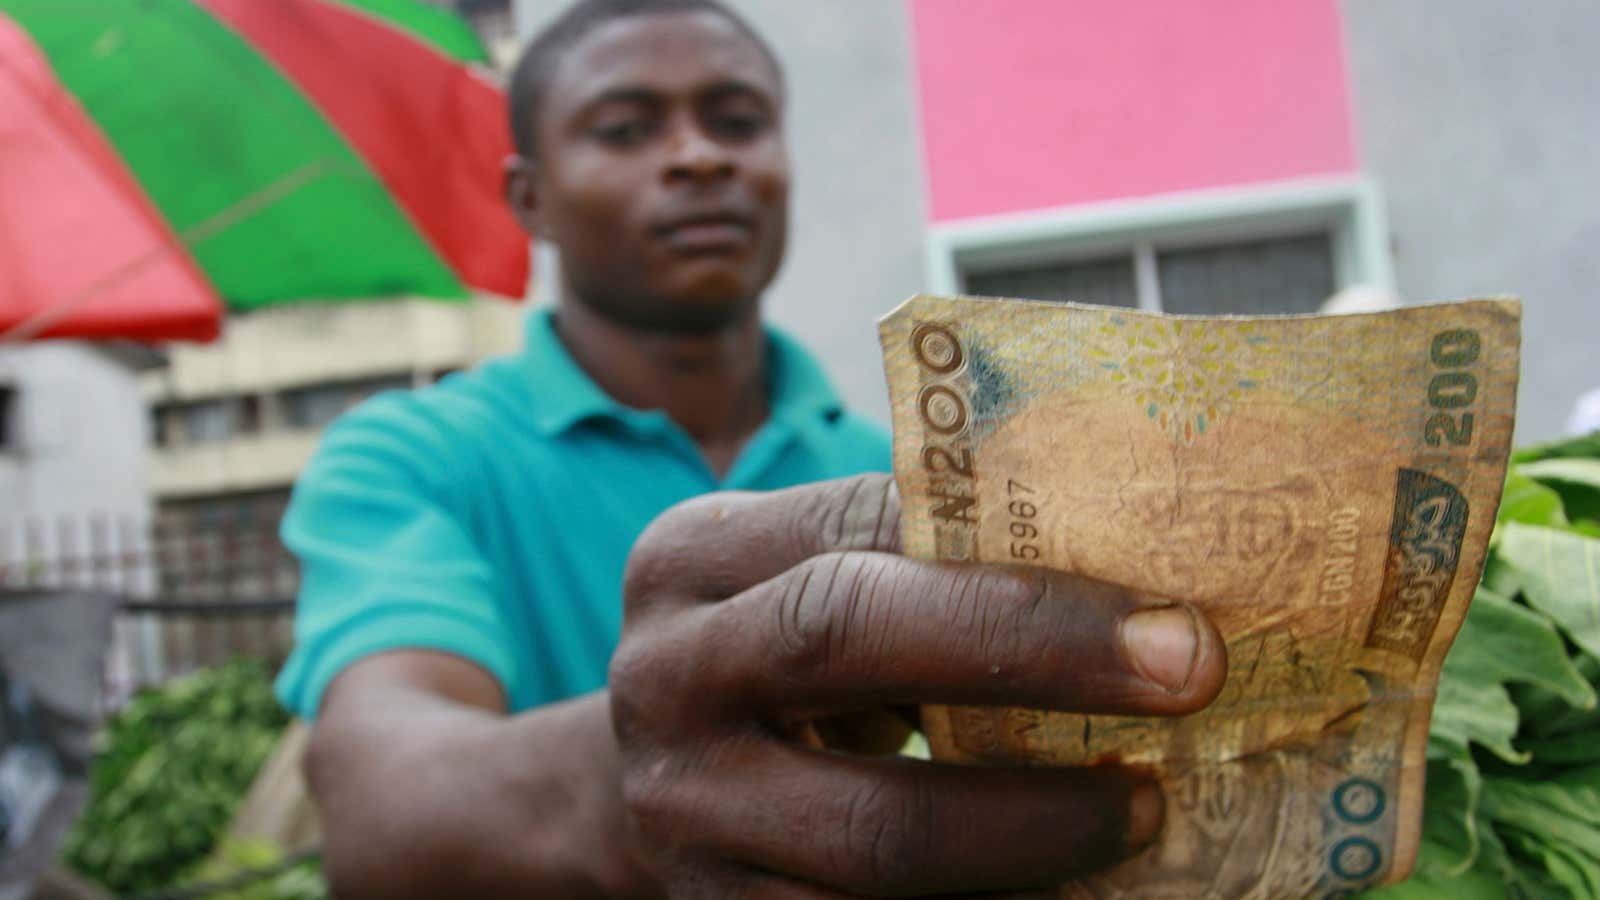 The 200 naira note is one of three Nigeria wants to redesign 